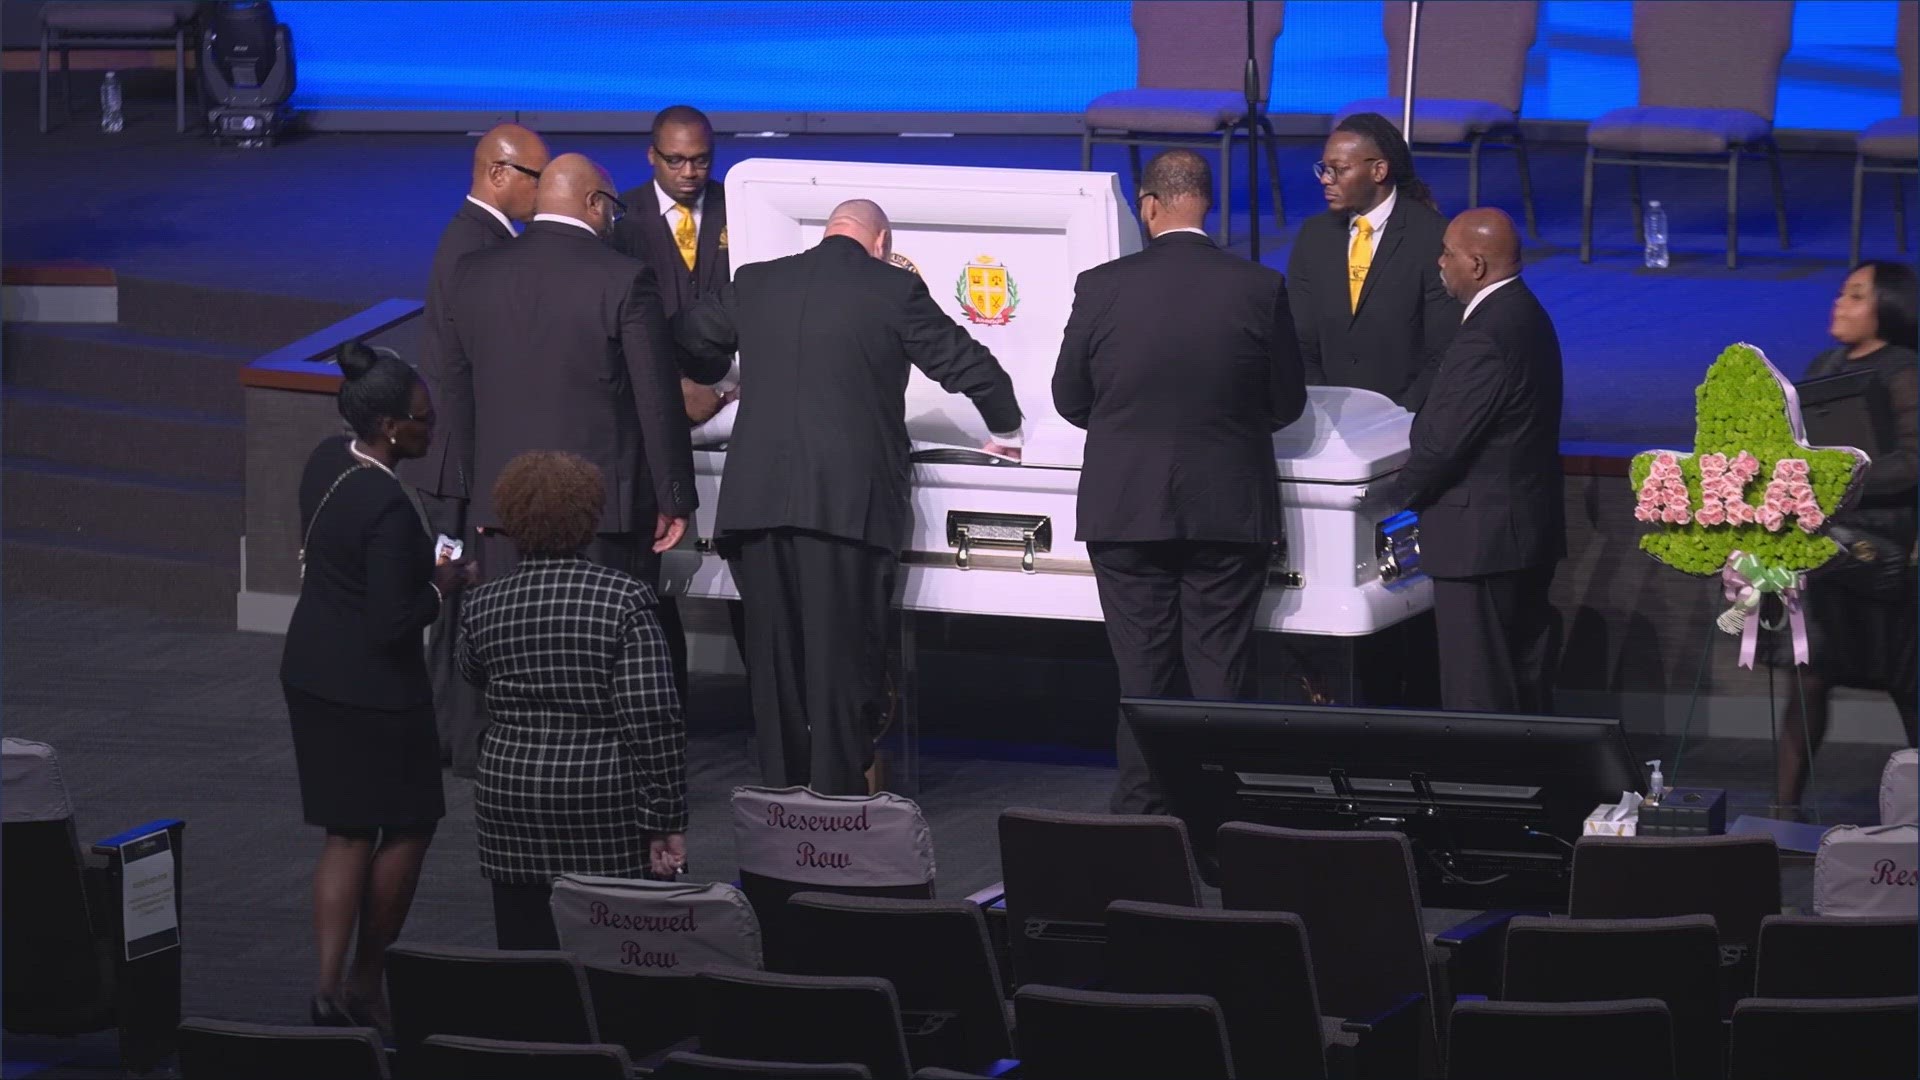 The wake for the late Congresswoman Eddie Bernice Johnson is set to take place Monday night.